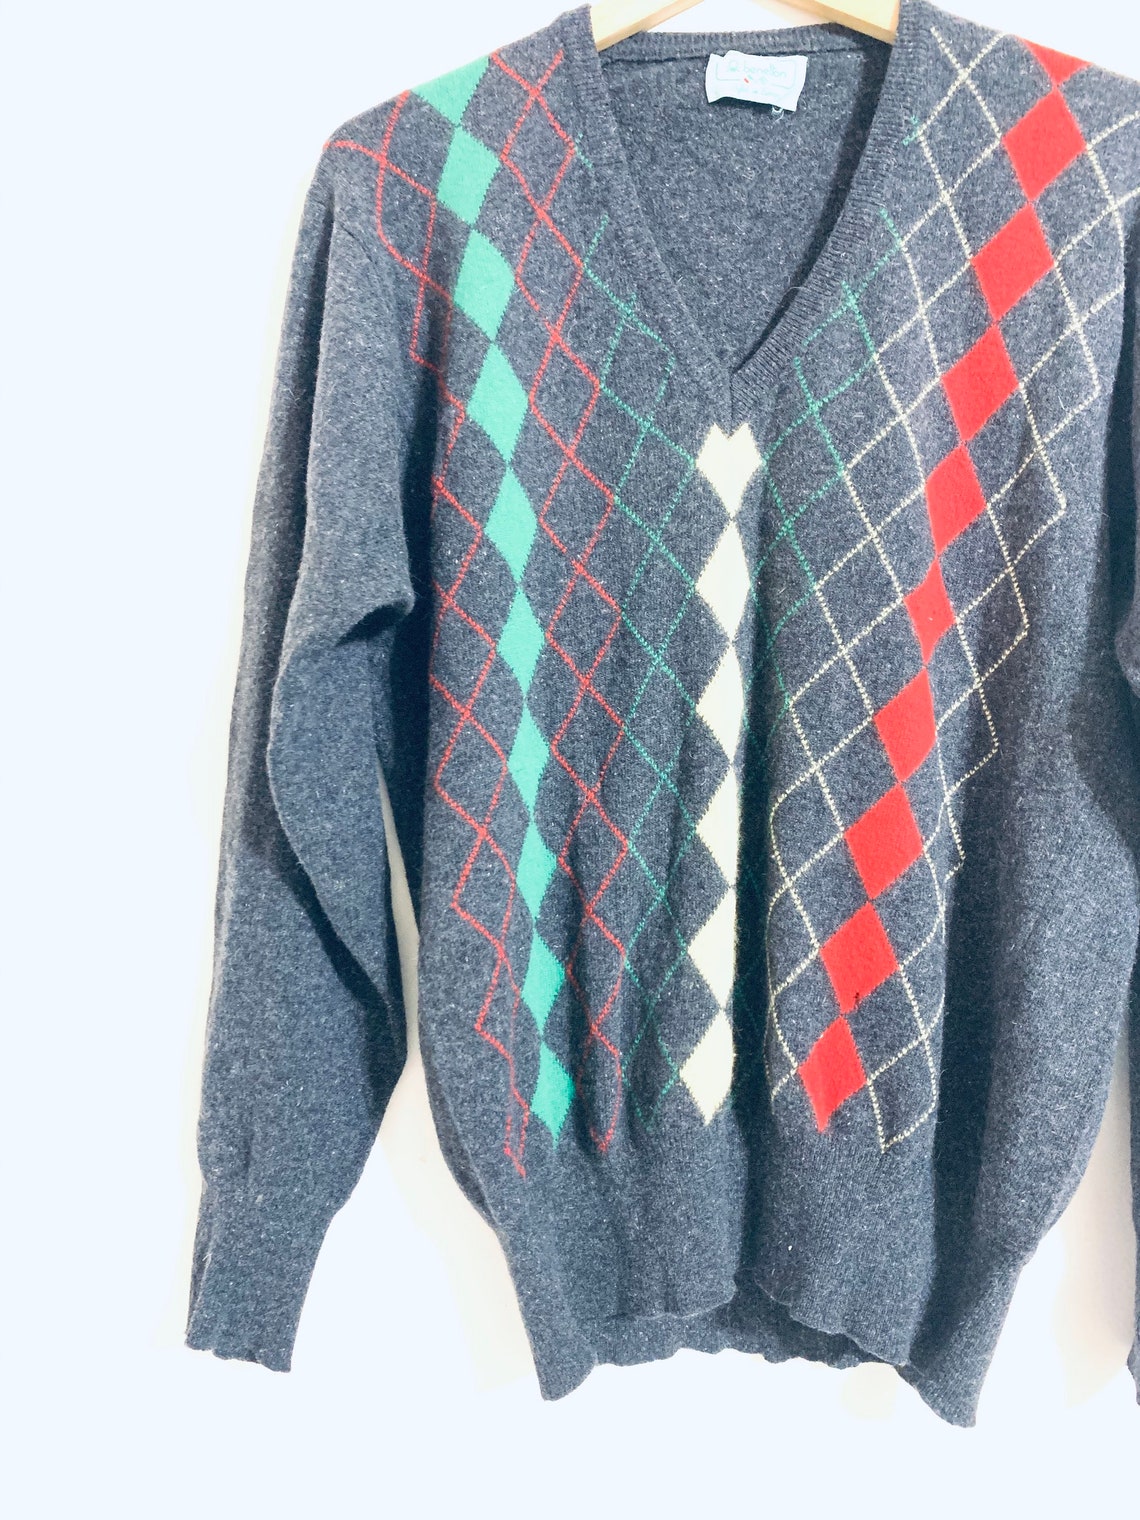 Vintage Argyle Knit Benetton Sweater. Grey Wool and Angora Pullover ...